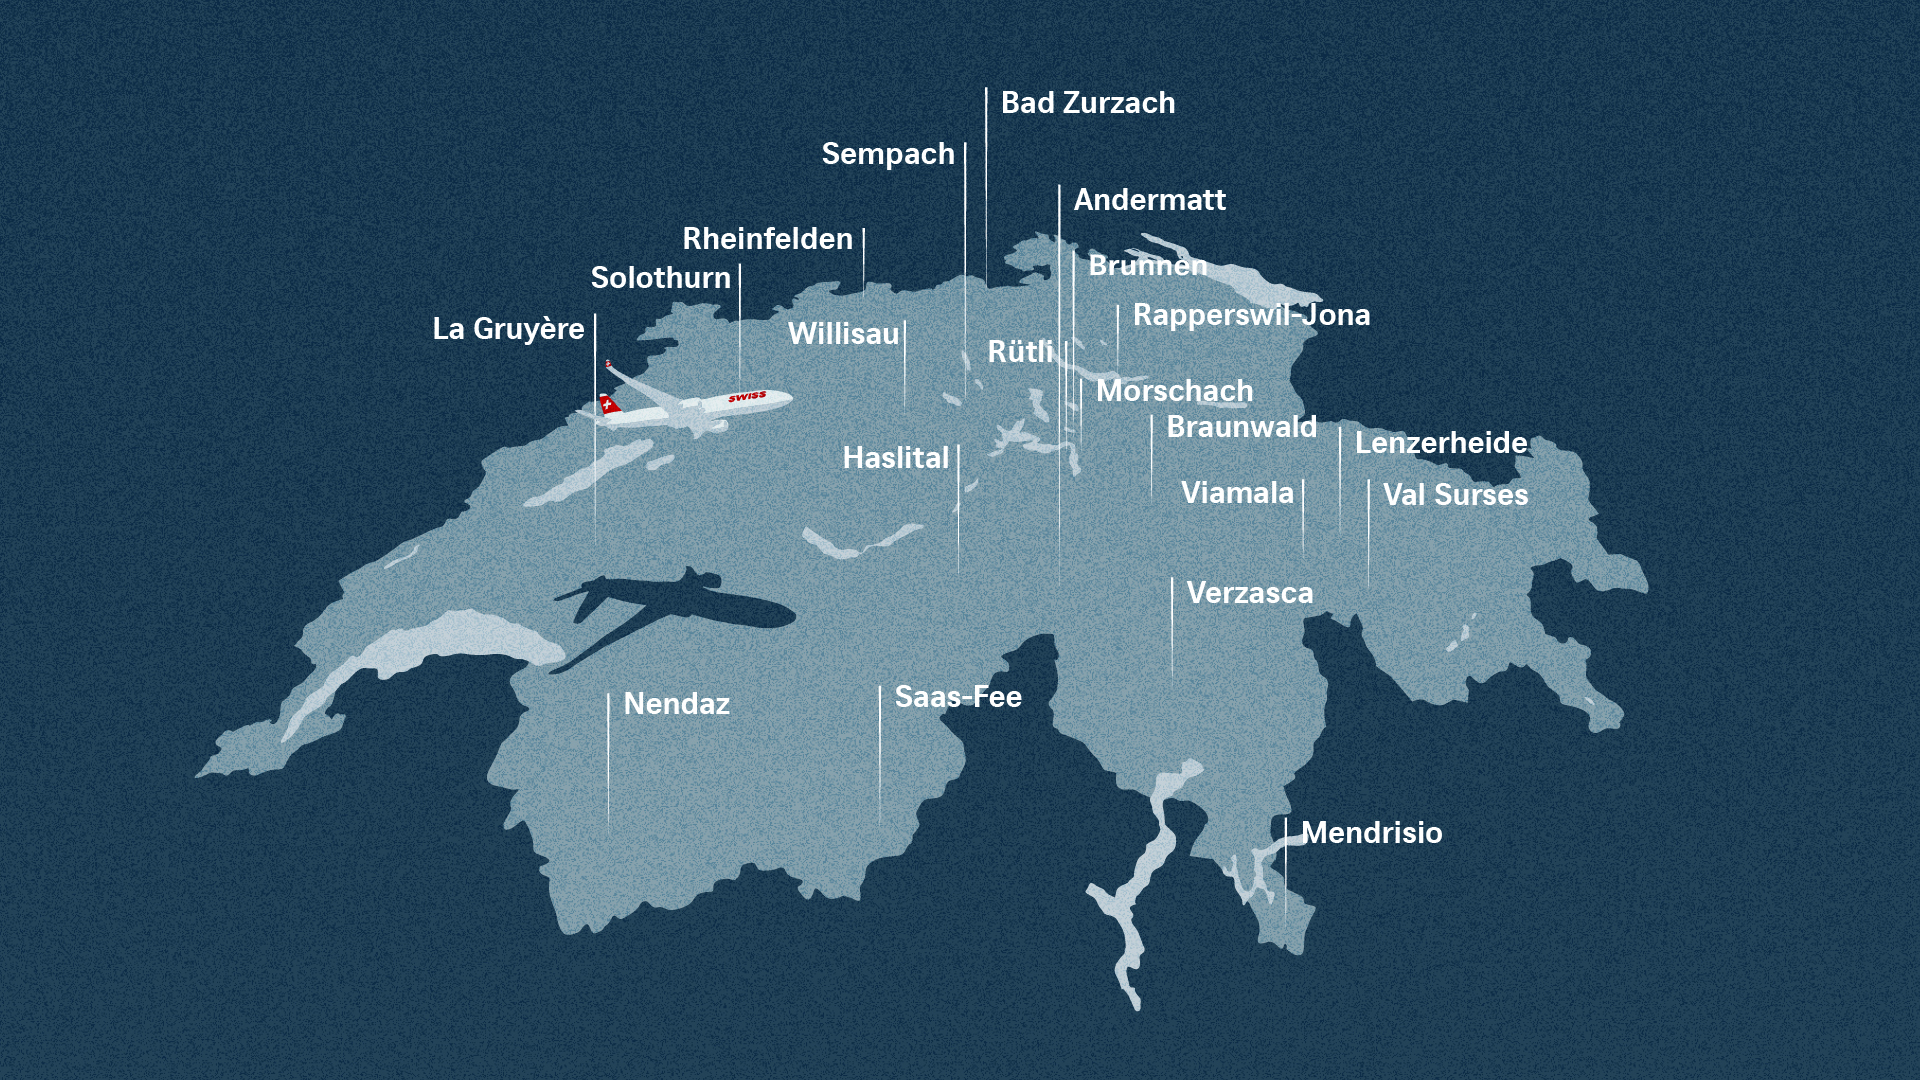 Places in Switzerland that SWISS names an aircraft after